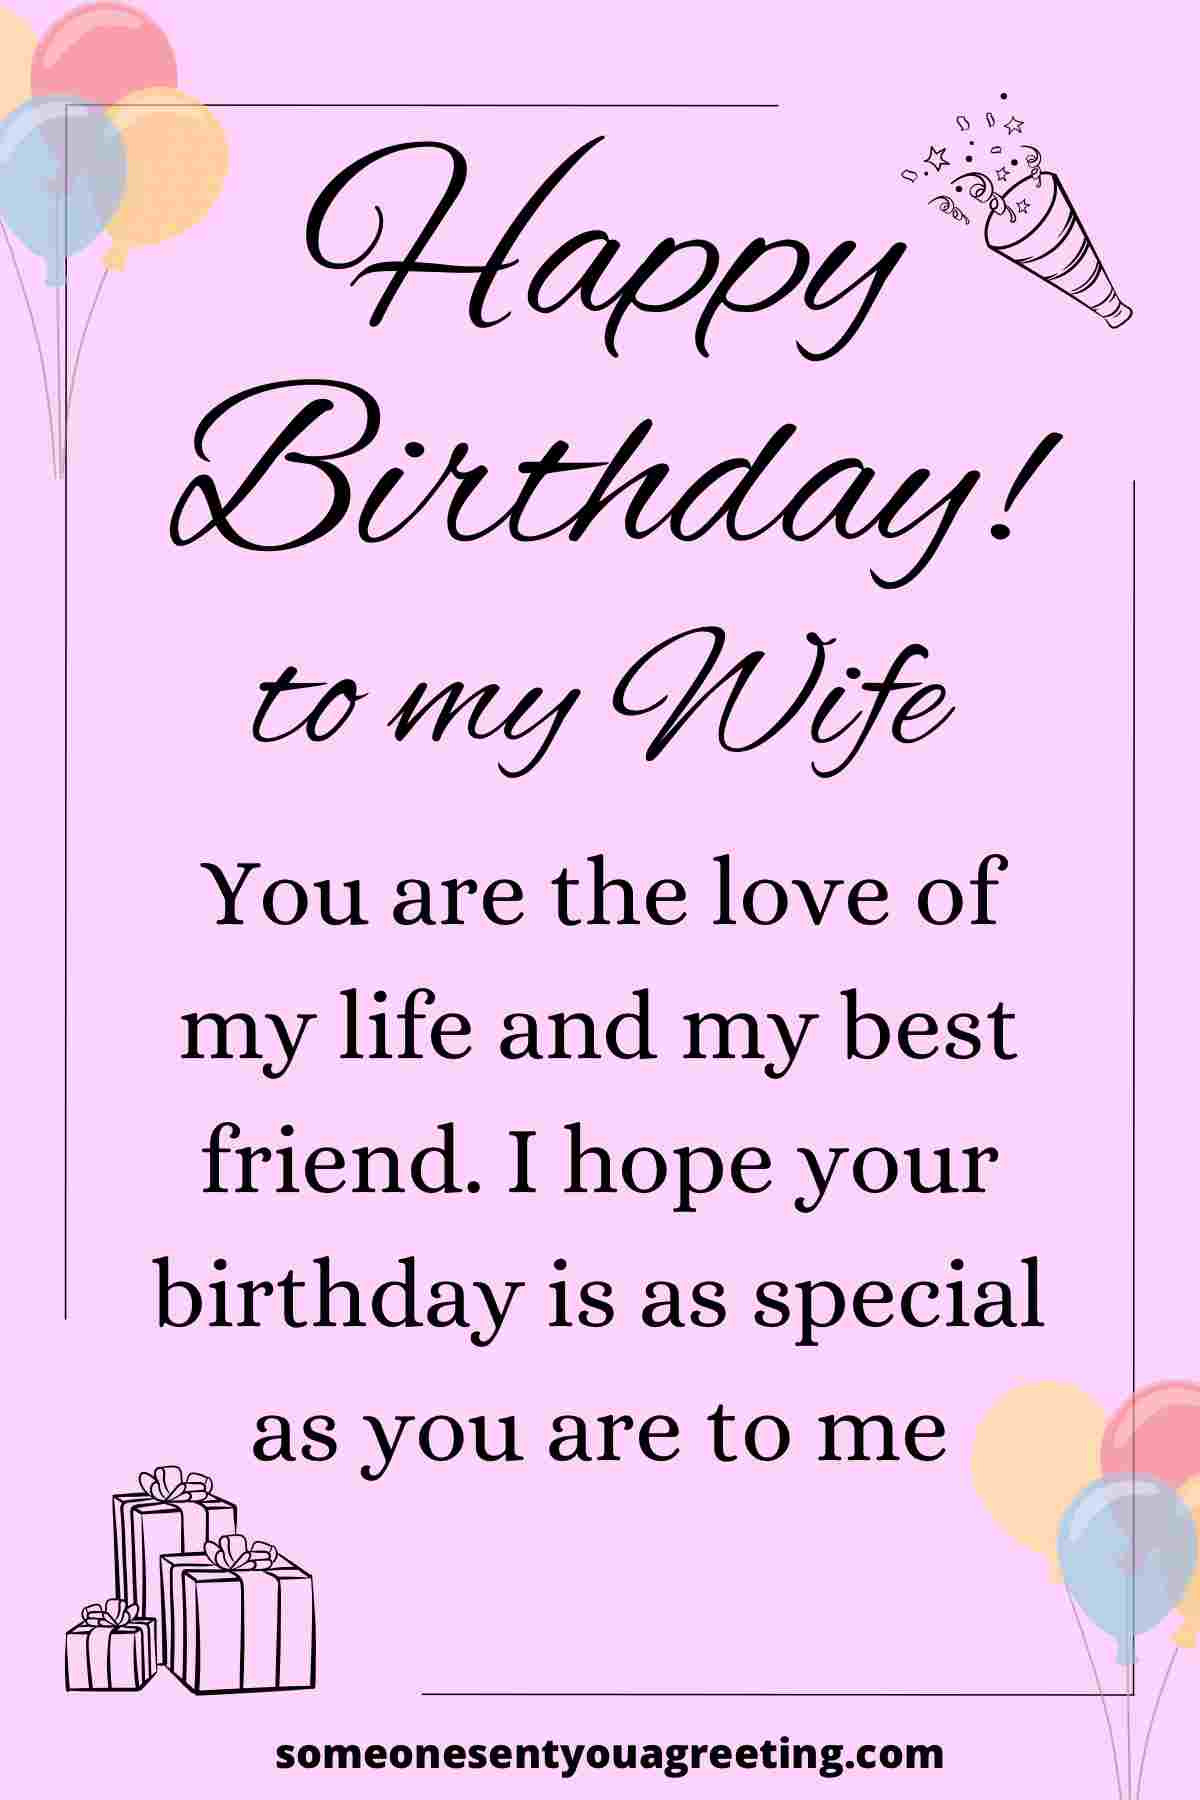 sweet example words for a birthday card message